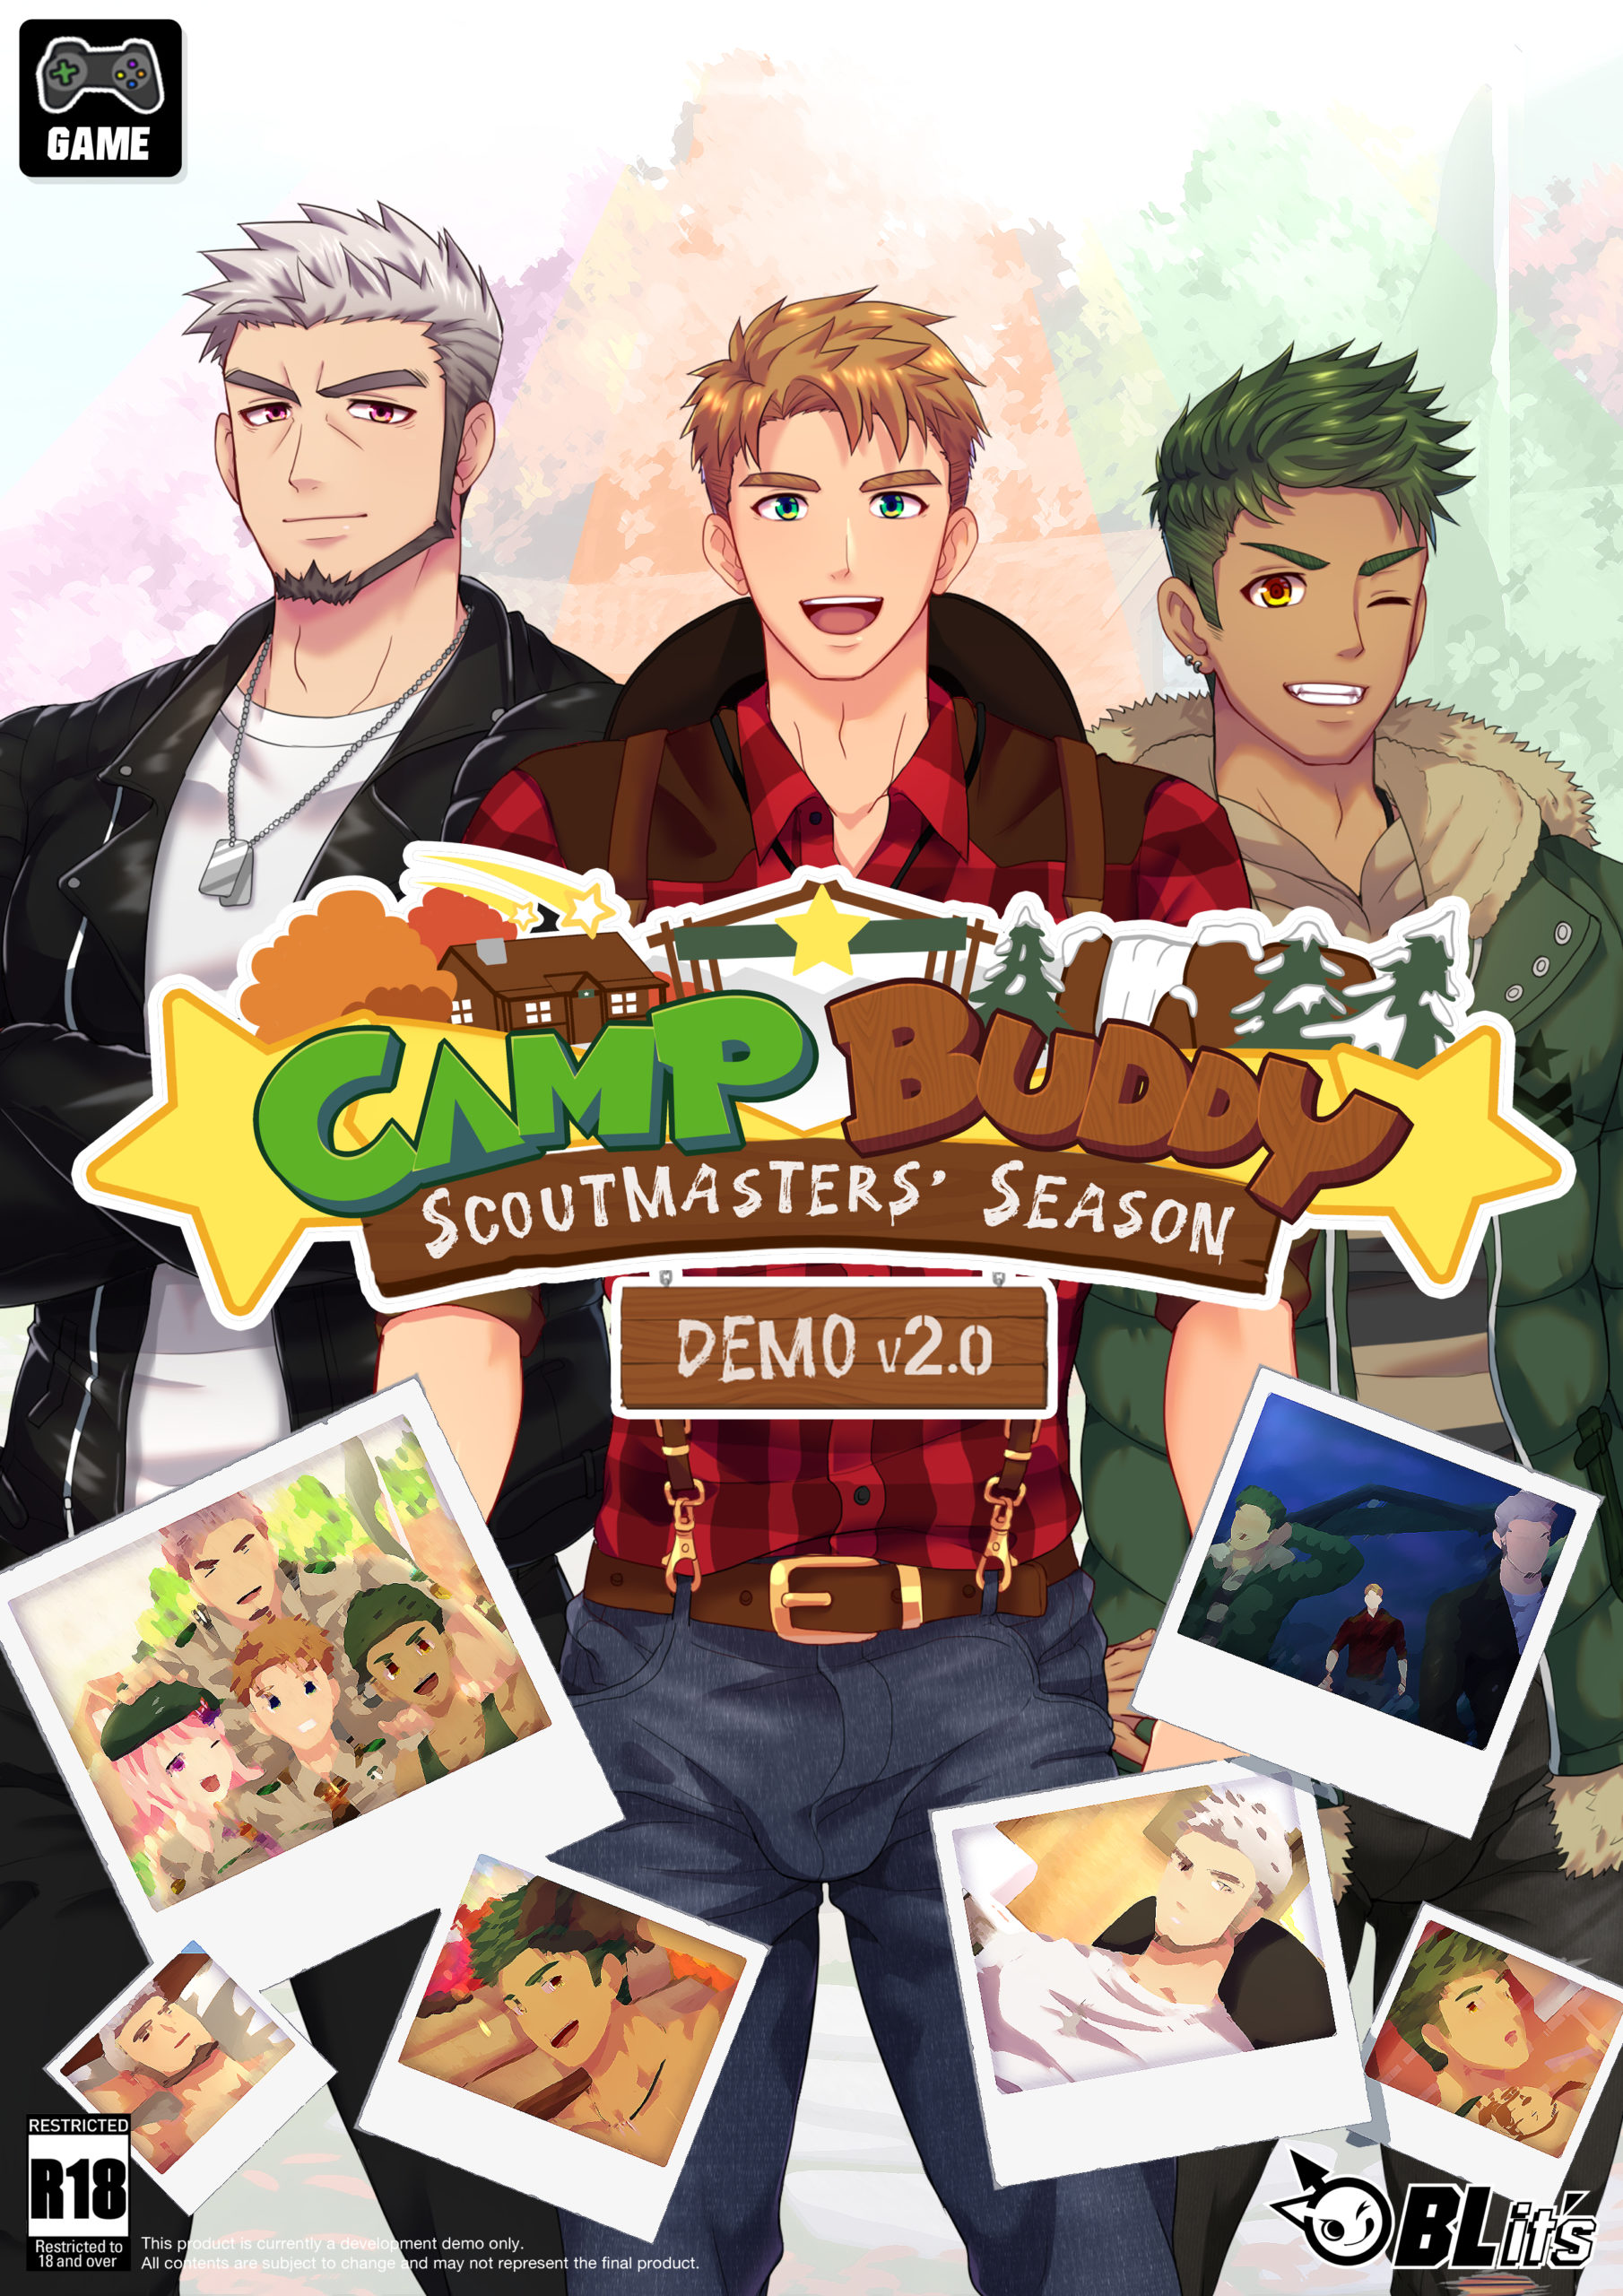 Camp buddy: scoutmaster season free download